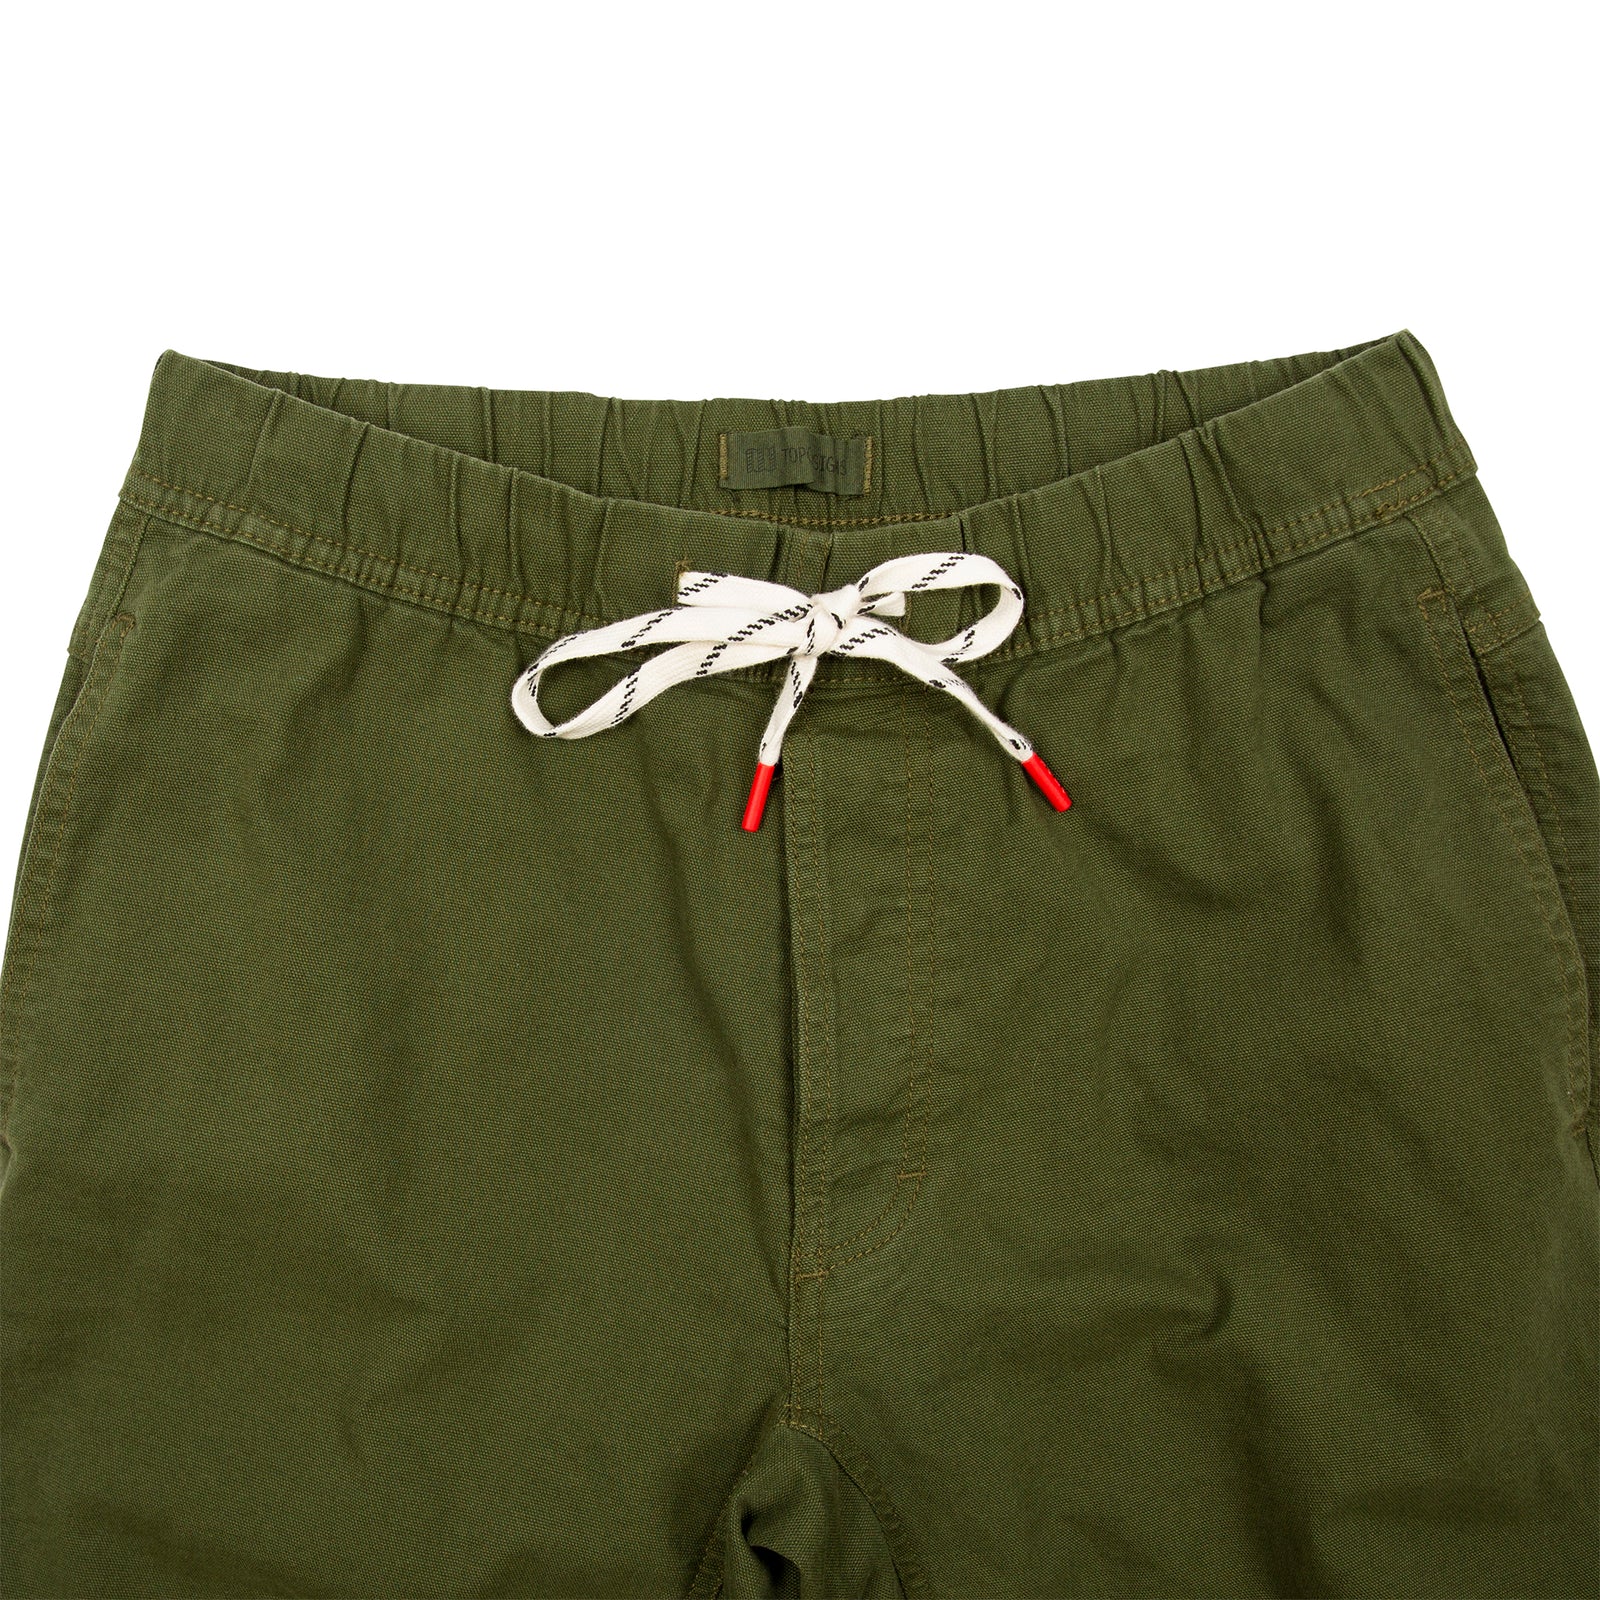 General detail shot of Topo Designs Men's Dirt Pants in Olive green showing drawstring waistband.